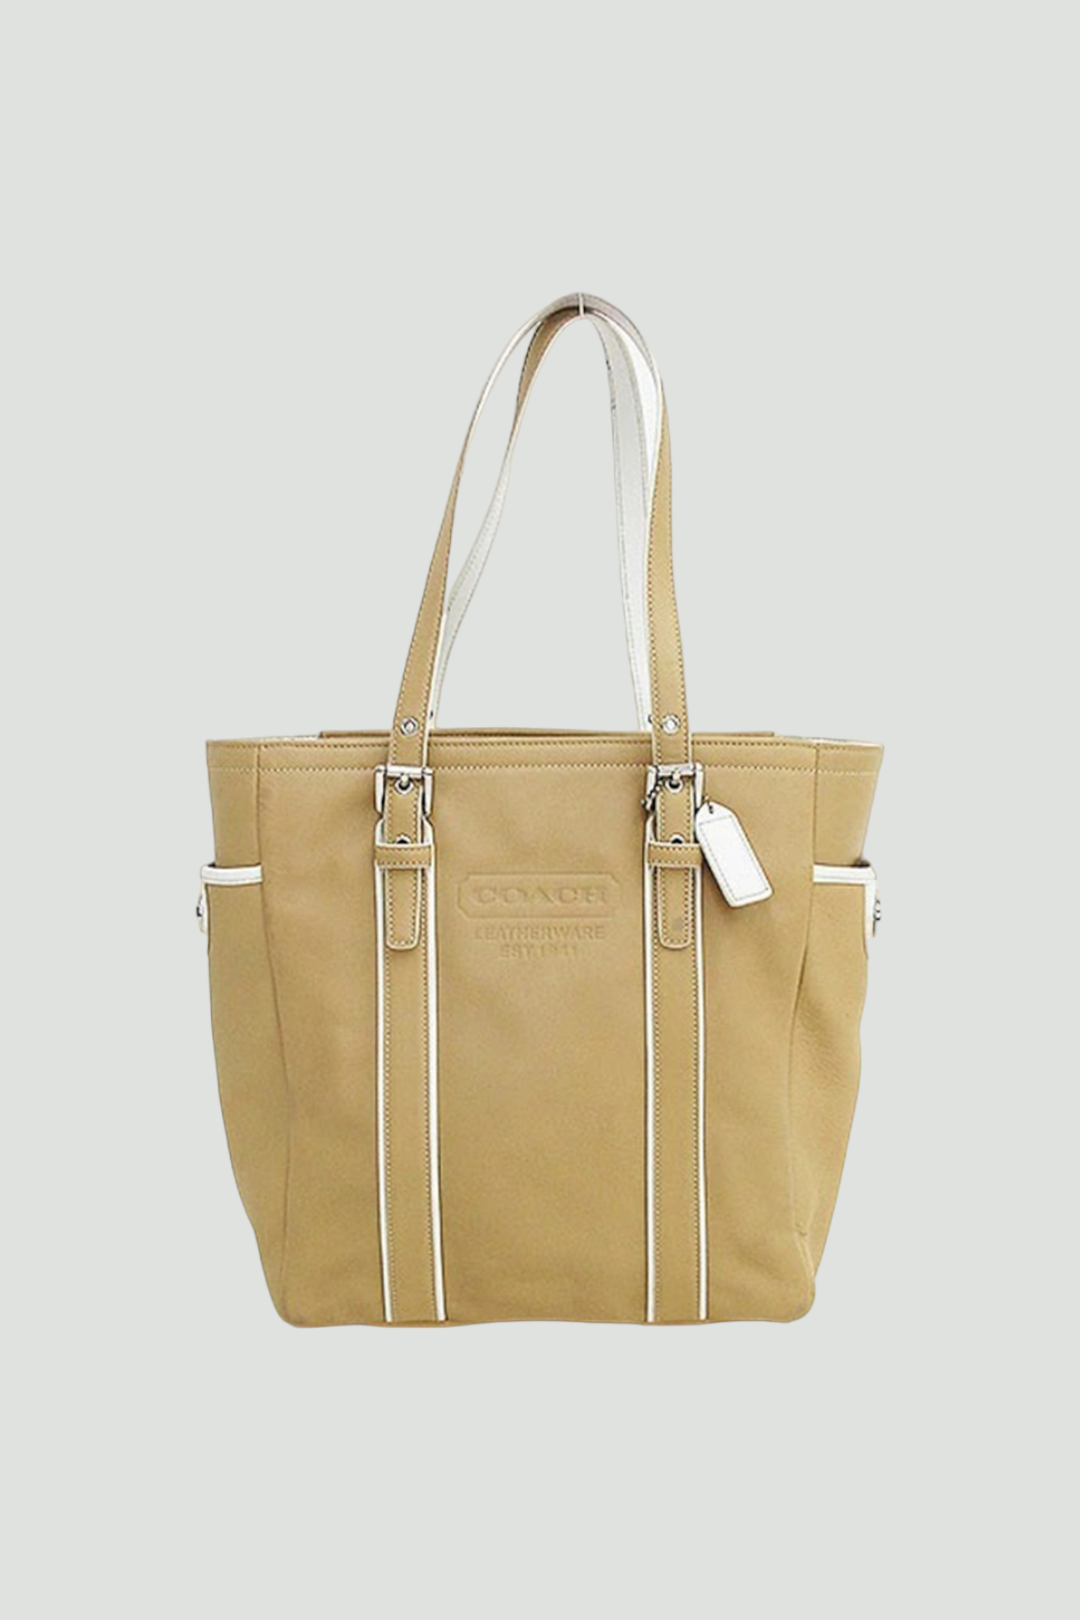 Coach Leather Tote bag in Mustard Yellow and White